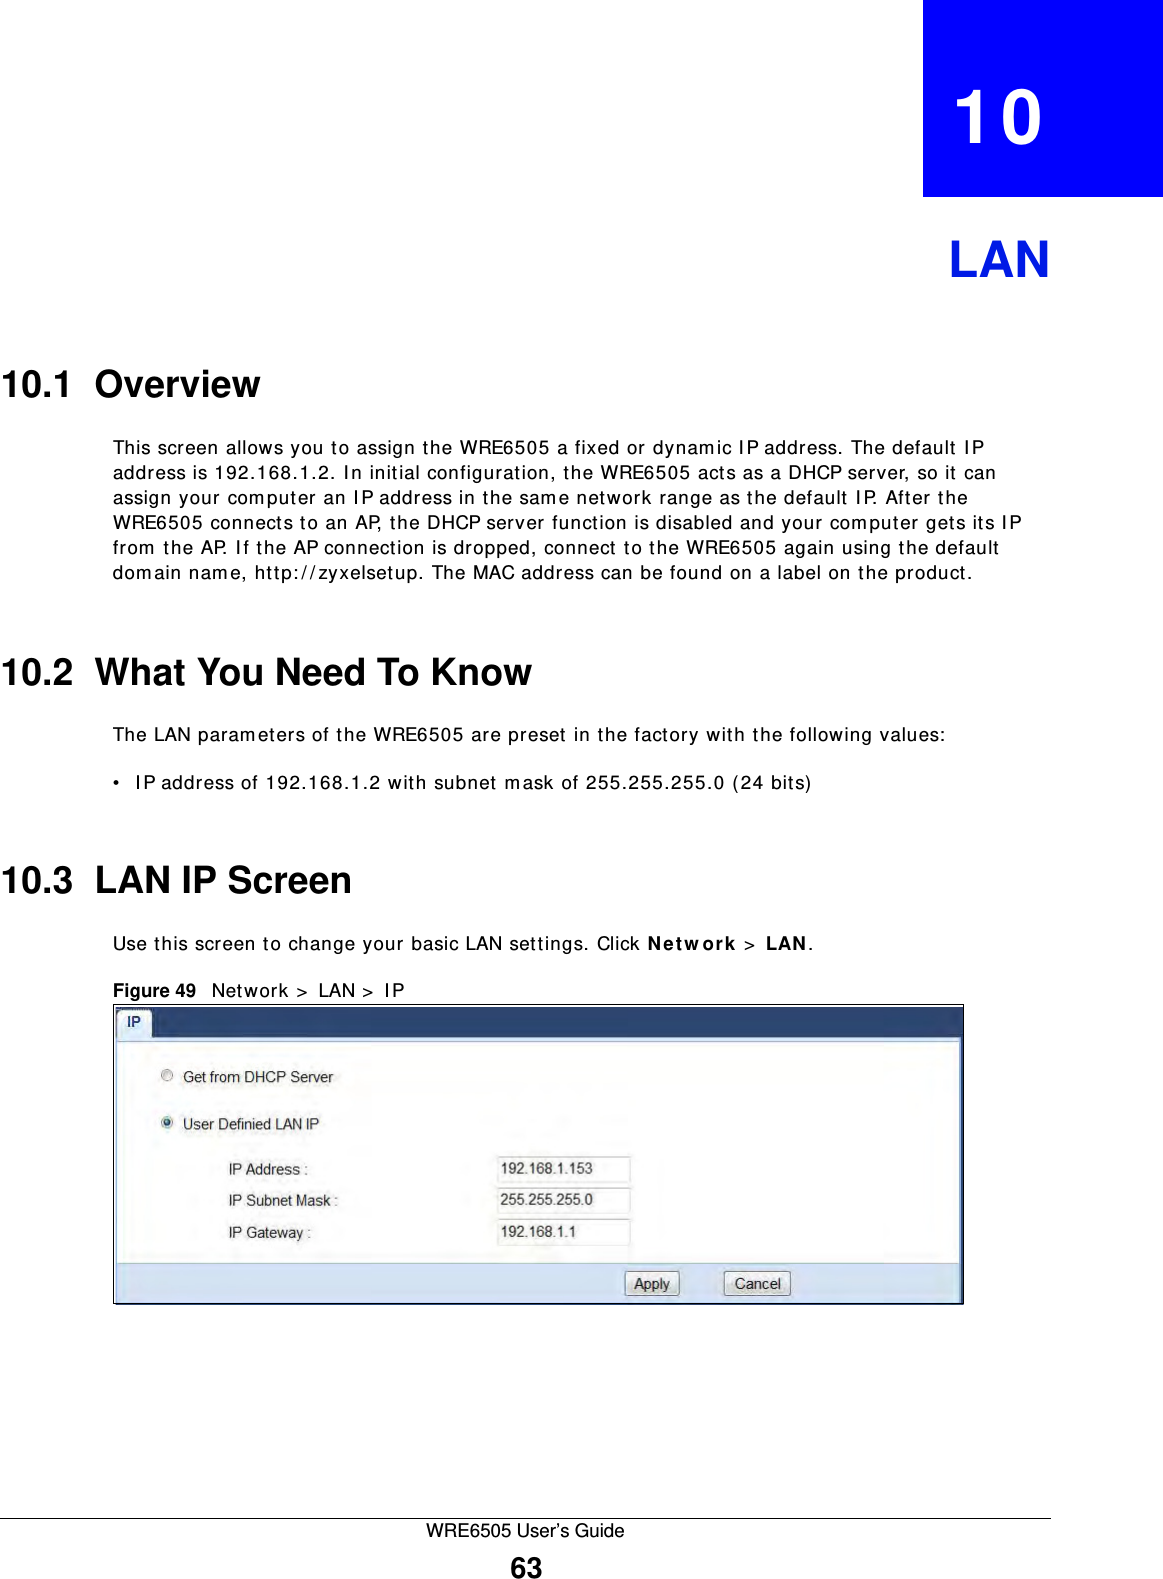 WRE6505 User’s Guide63CHAPTER   10LAN10.1  OverviewThis screen allows you to assign the WRE6505 a fixed or dynam ic I P address. The default I P address is 192.168.1.2. I n initial configuration, the WRE6505 acts as a DHCP server, so it can assign your computer an IP address in the same network range as the default I P. After the WRE6505 connects to an AP, the DHCP server function is disabled and your computer gets its I P from the AP. I f the AP connection is dropped, connect to the WRE6505 again using the default dom ain nam e, http: / / zyxelsetup. The MAC address can be found on a label on the product.10.2  What You Need To KnowThe LAN param eters of the WRE6505 are preset in the factory with the following values:• I P address of 192.168.1.2 with subnet m ask of 255.255.255.0 (24 bits)10.3  LAN IP ScreenUse this screen to change your basic LAN settings. Click N e t w or k  &gt;  LAN .Figure 49   Network &gt;  LAN &gt;  IP 